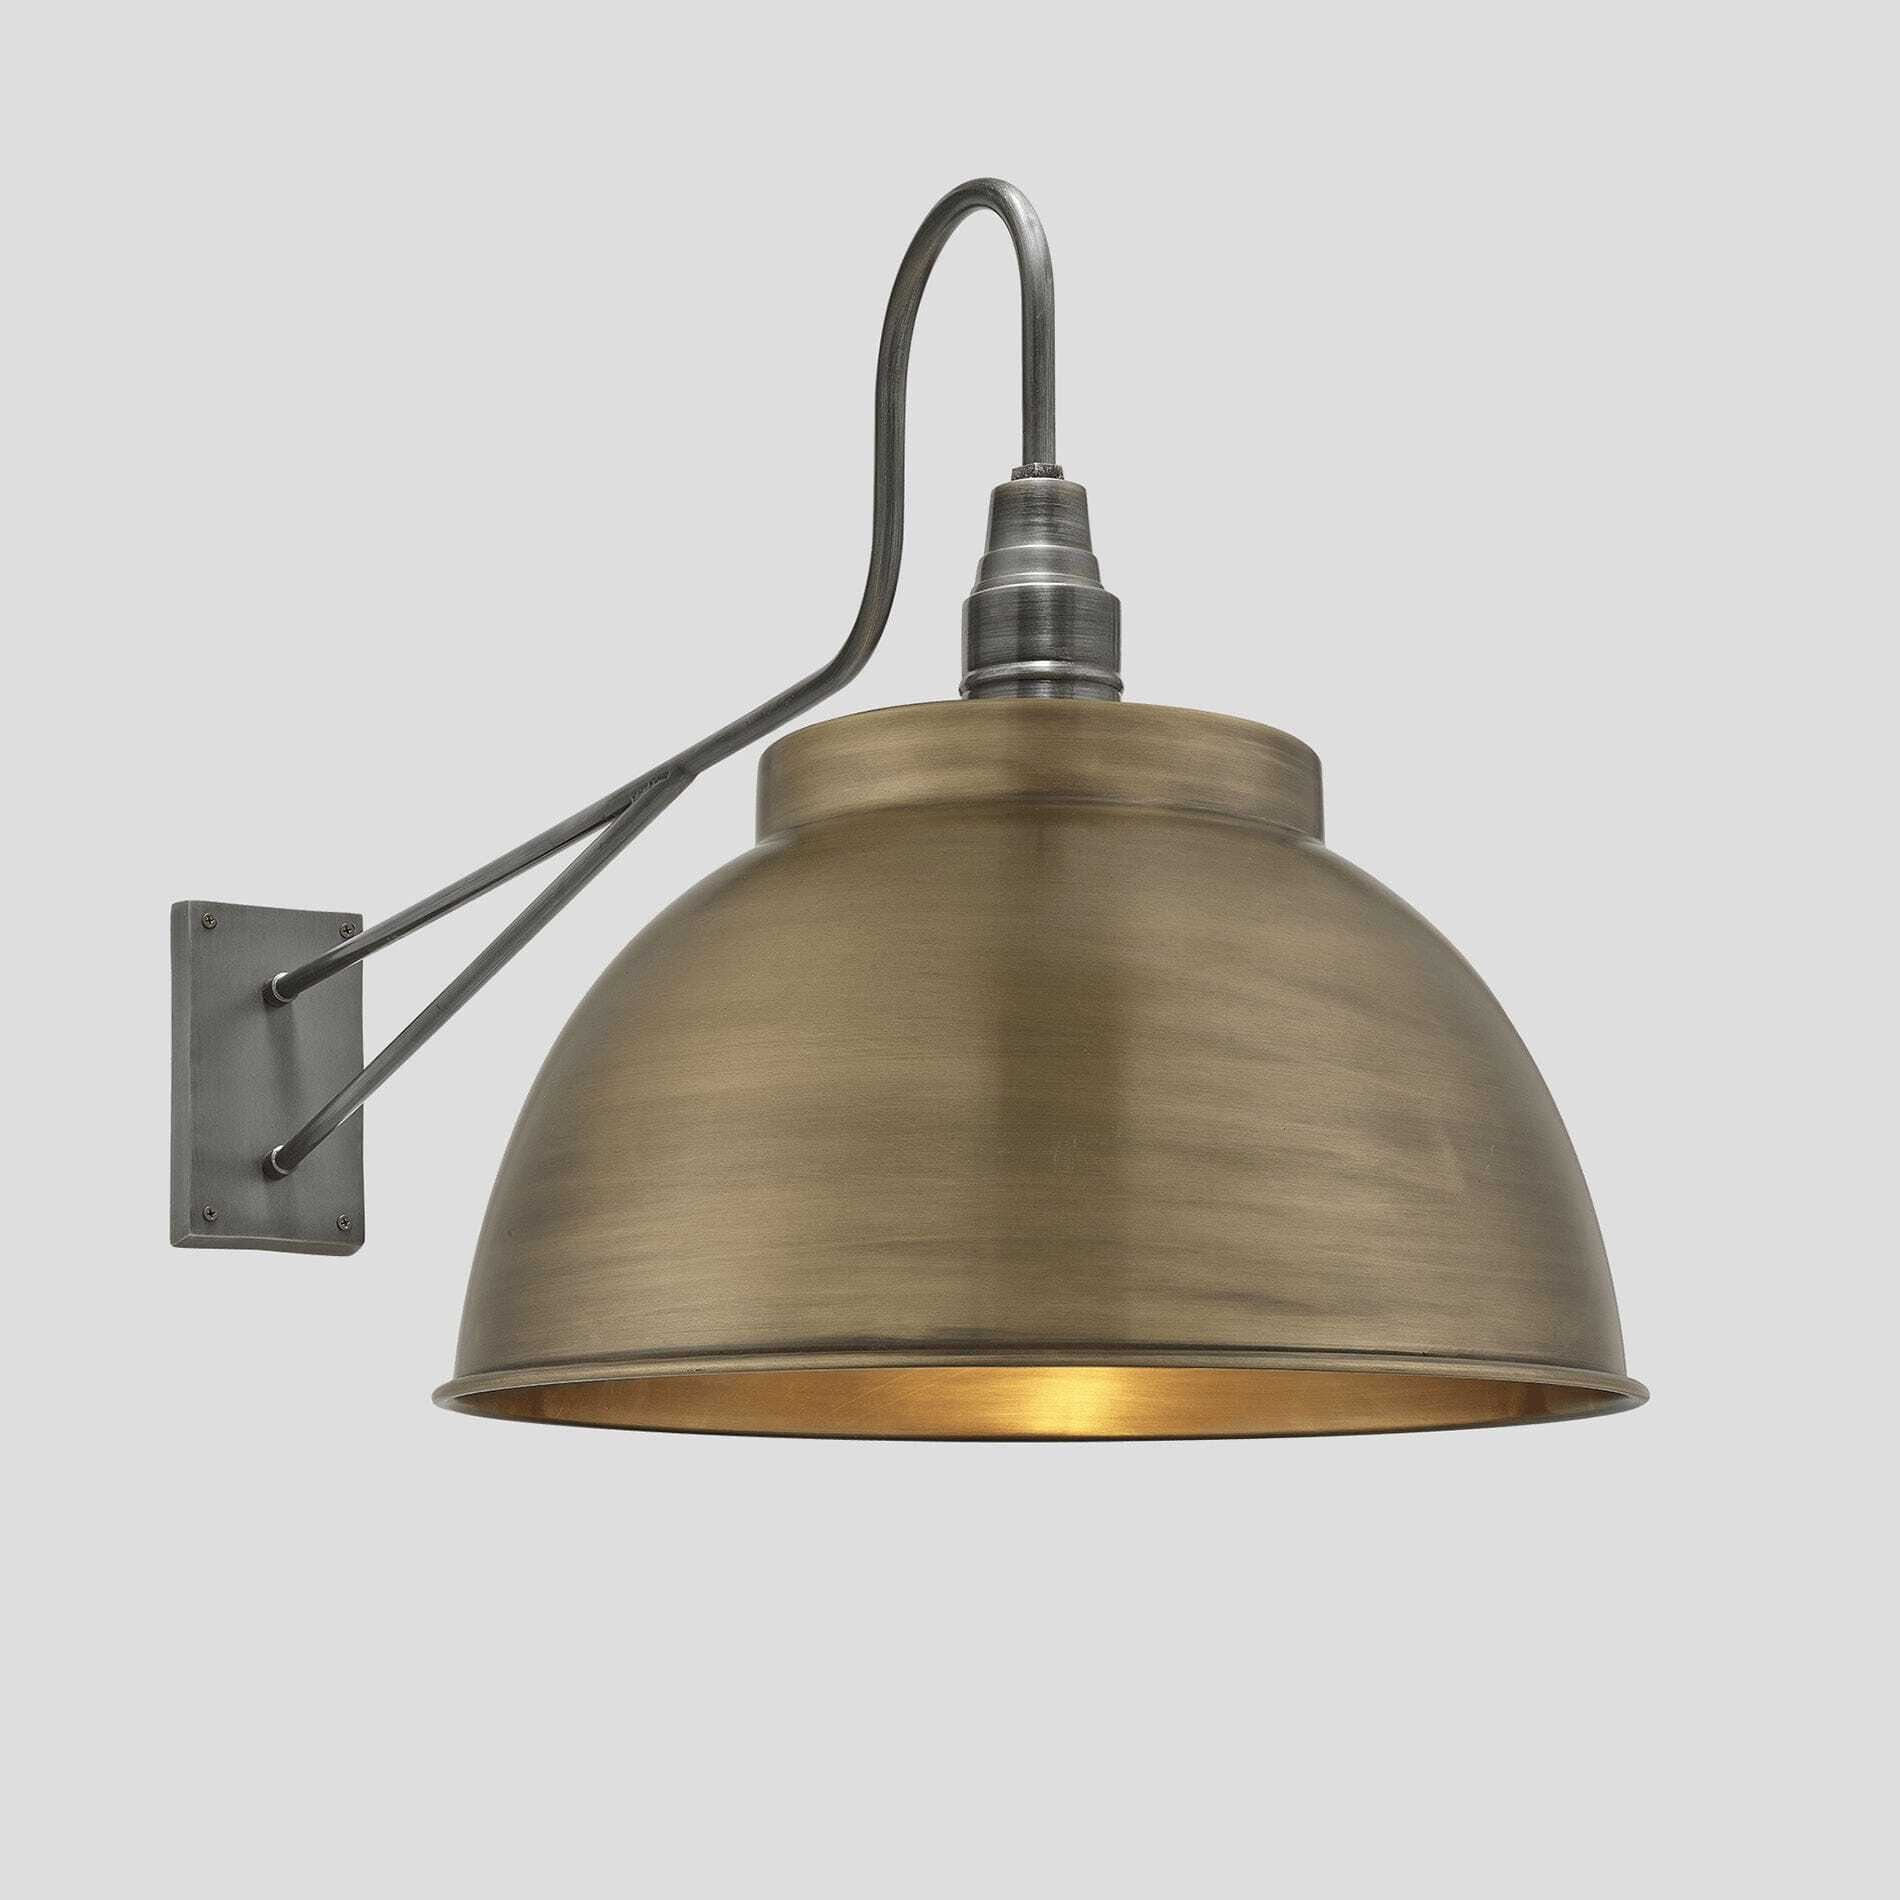 Long Arm Dome Wall Light – 17 Inch – Brass - Pre-order - Expected w/c 13th of May